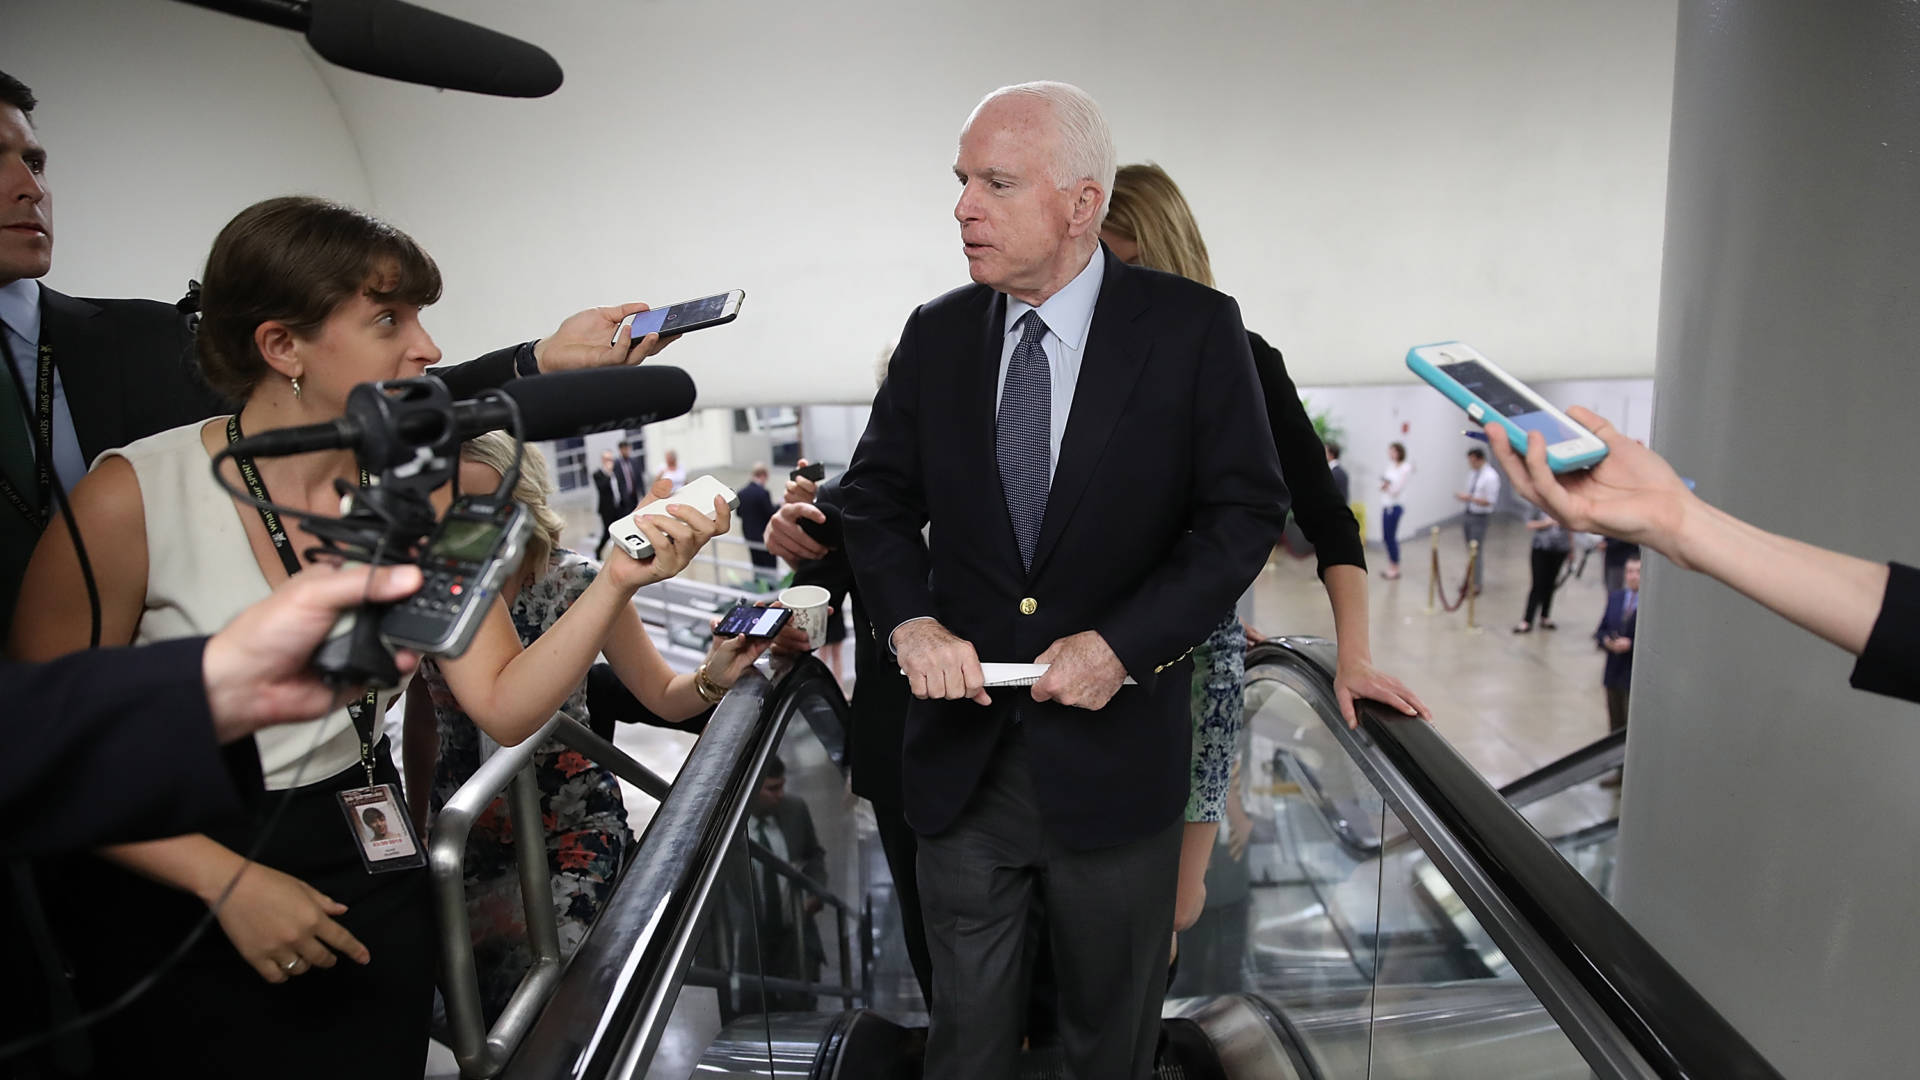 Sen. John McCain, R-Ariz., answers questions from reporters on Capitol Hill earlier this month. He makes his return to the Senate on Tuesday, July 25, 2017, for the first time since being diagnosed with brain cancer. Win McNamee/Getty Images